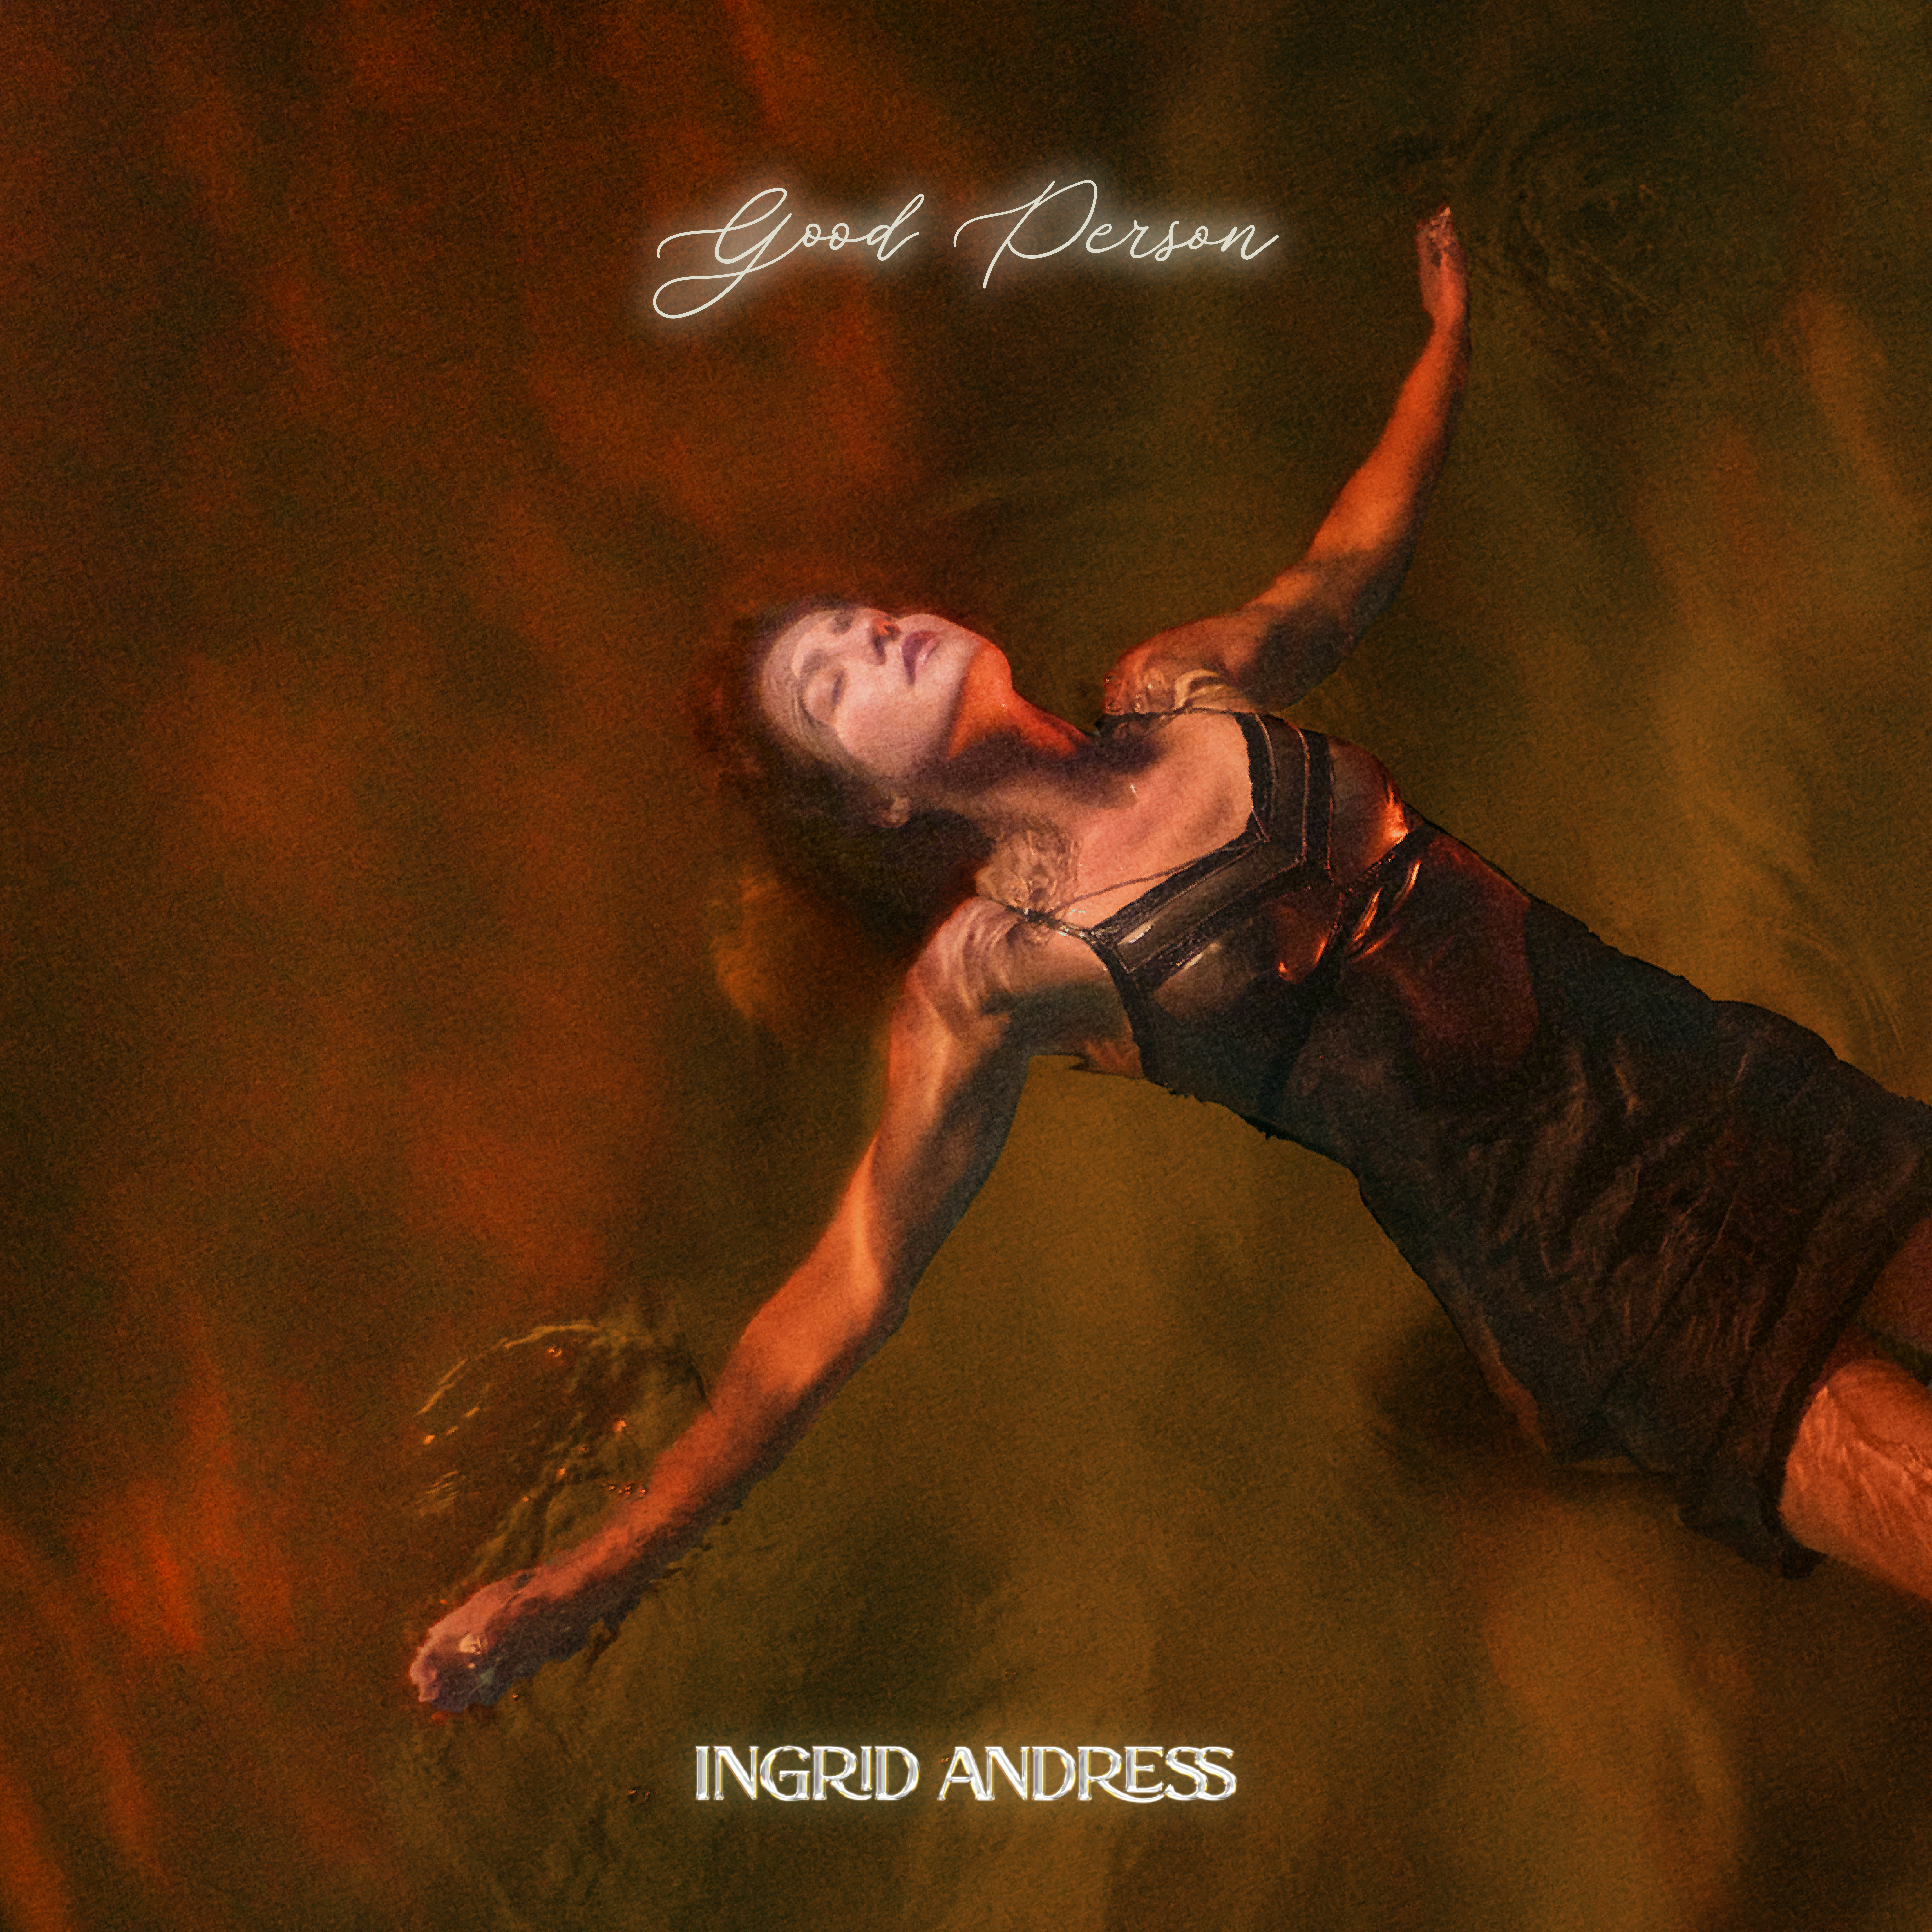 INGRID ANDRESS RELEASES GOOD PERSON (DELUXE) TODAY